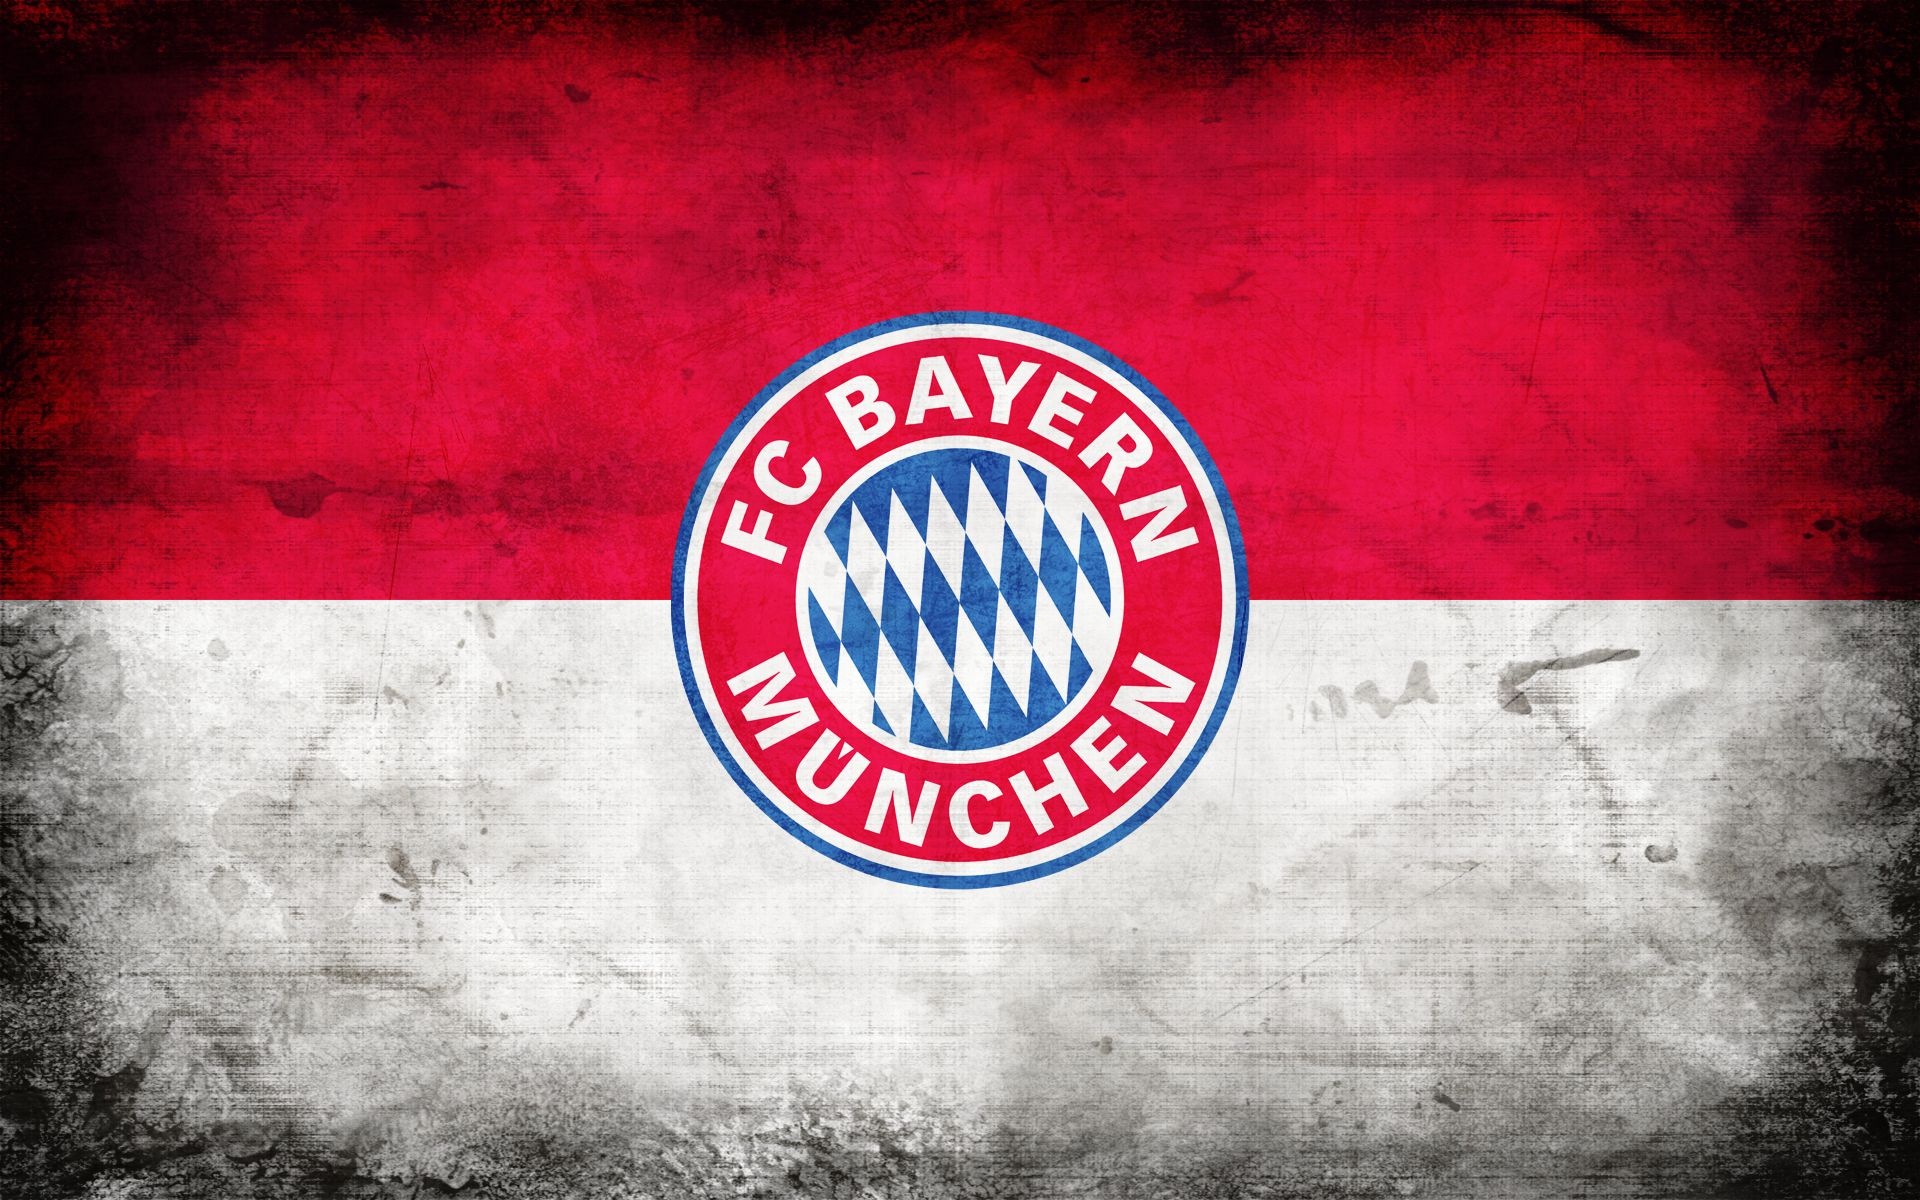 Bayern Munchen FC: Founded in 1900 and has become Germany's most famous and successful football club. 1920x1200 HD Background.